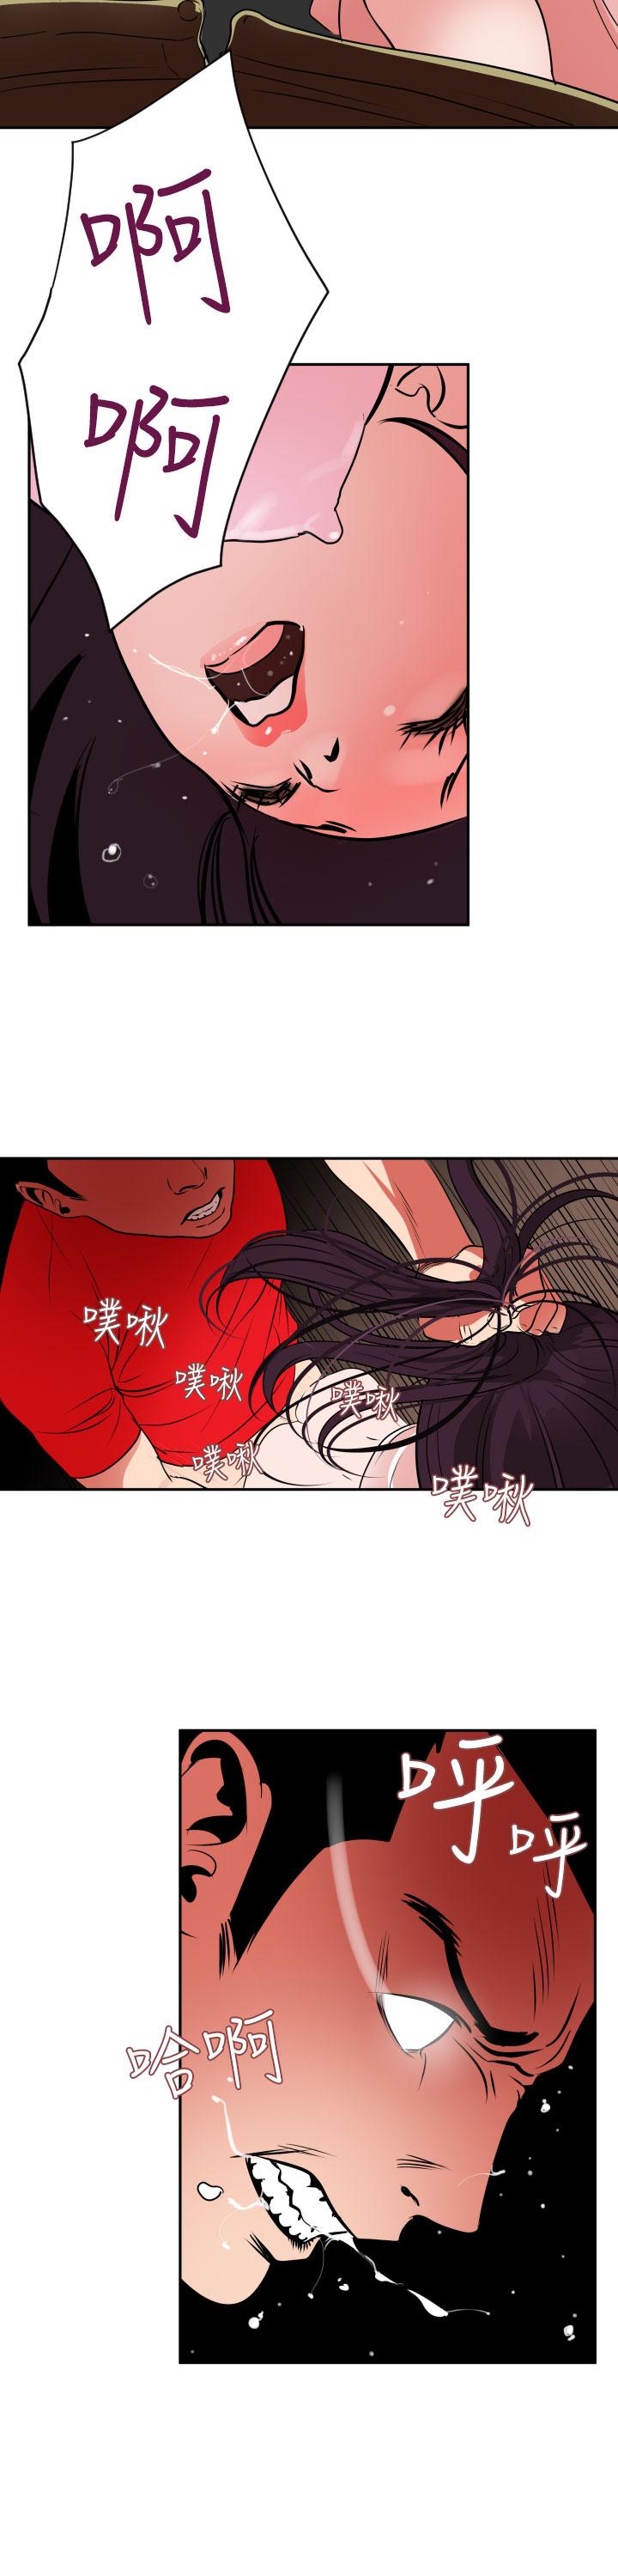 Desire King (慾求王) Ch.1-12 (chinese) 354